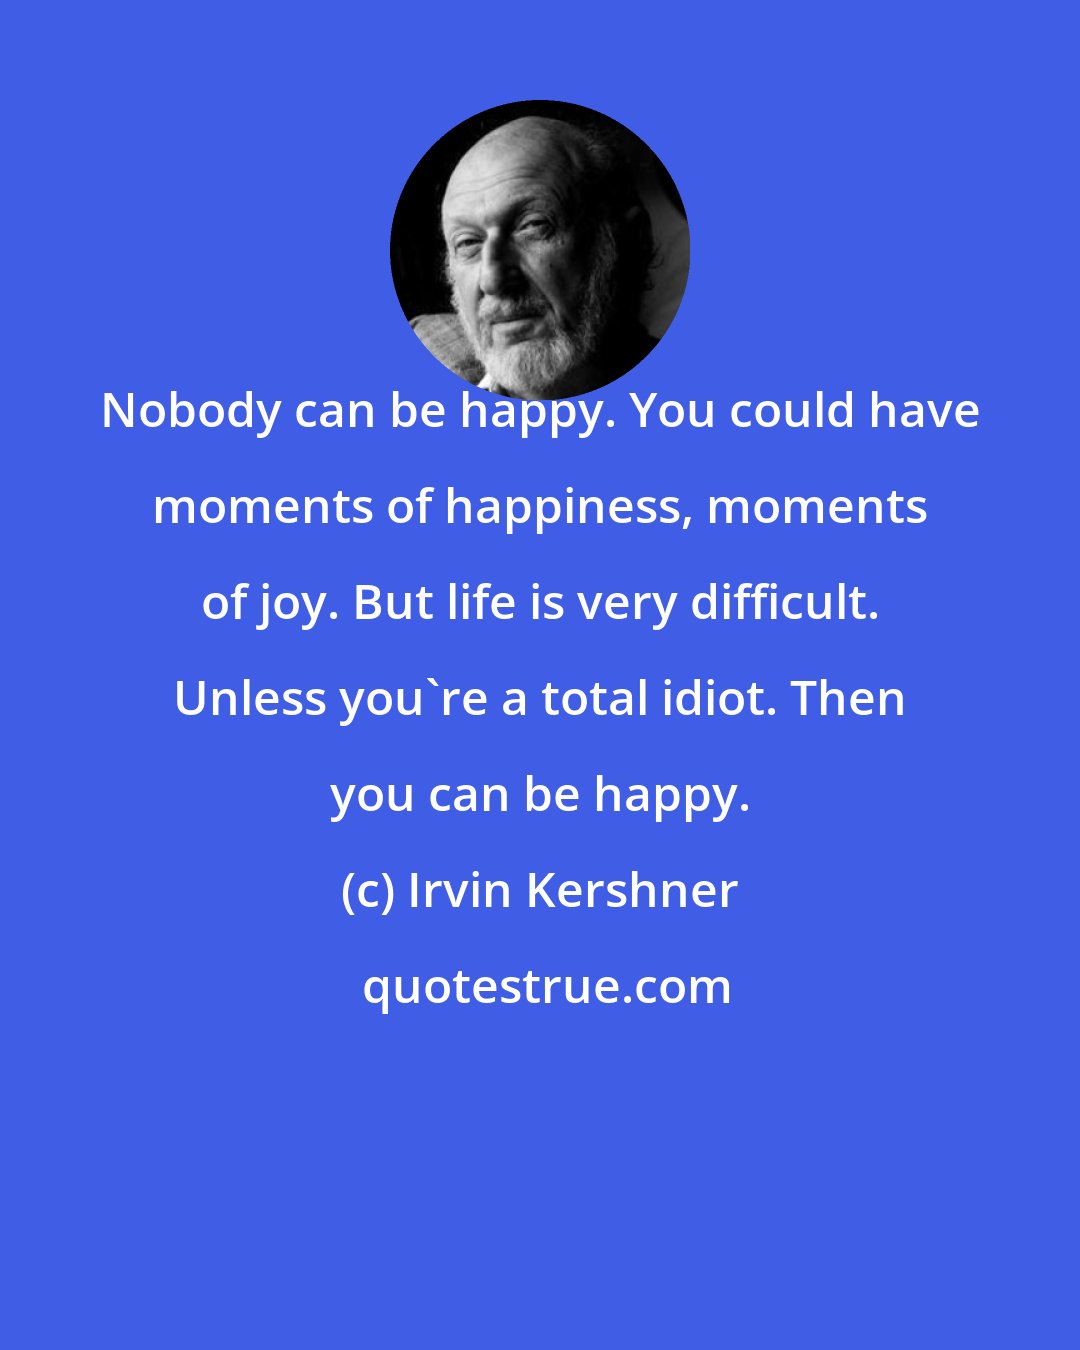 Irvin Kershner: Nobody can be happy. You could have moments of happiness, moments of joy. But life is very difficult. Unless you're a total idiot. Then you can be happy.